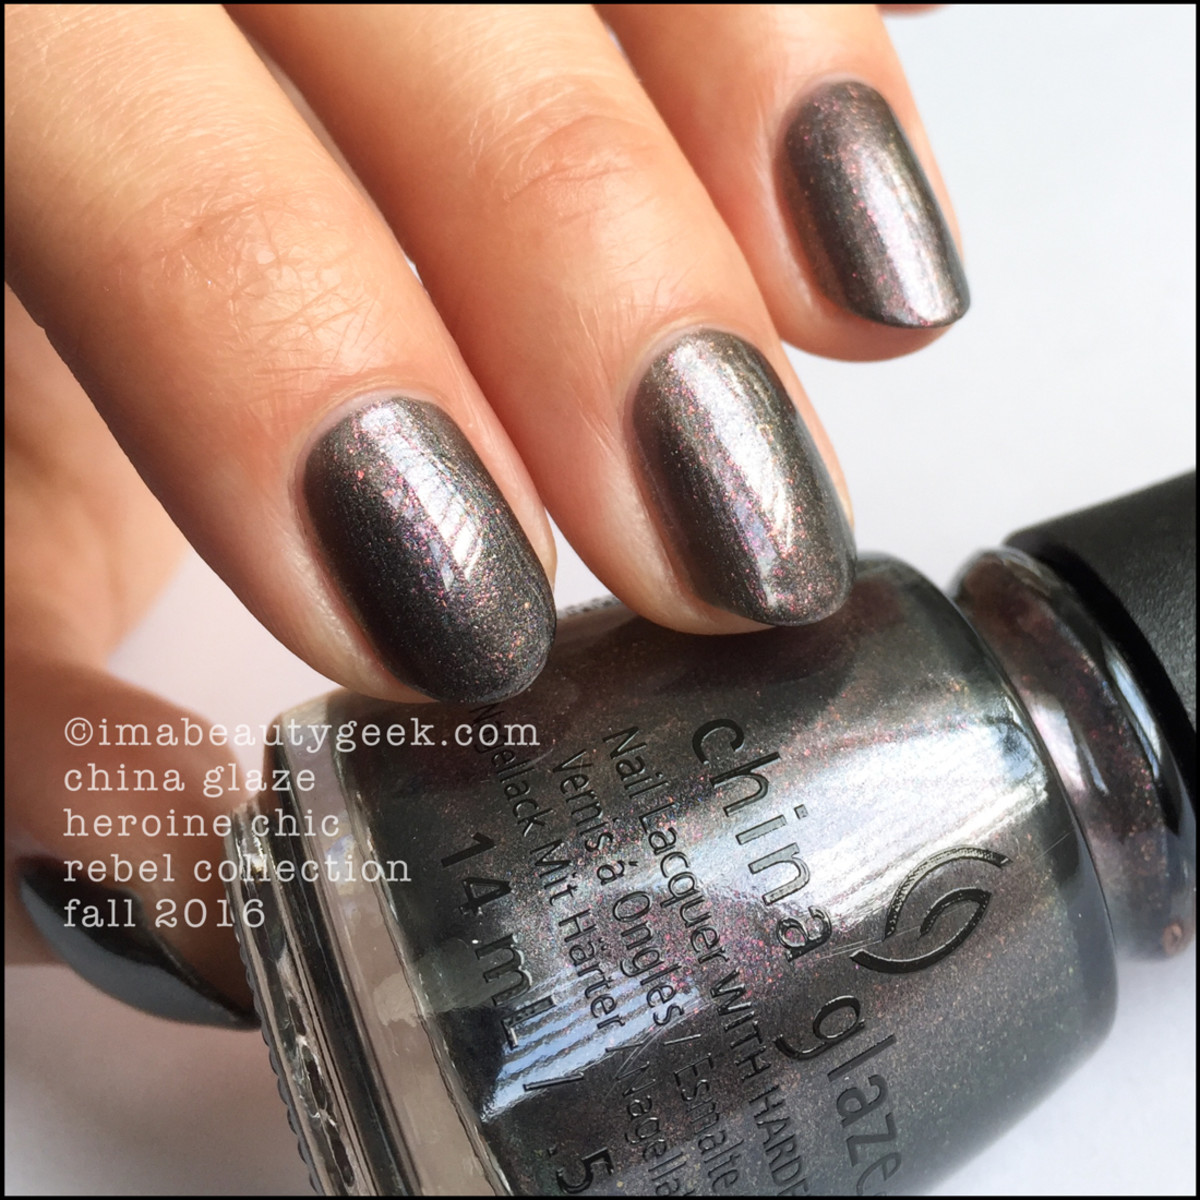 China Glaze Heroine Chic_China Glaze Rebel 2016 Collection Swatches Review